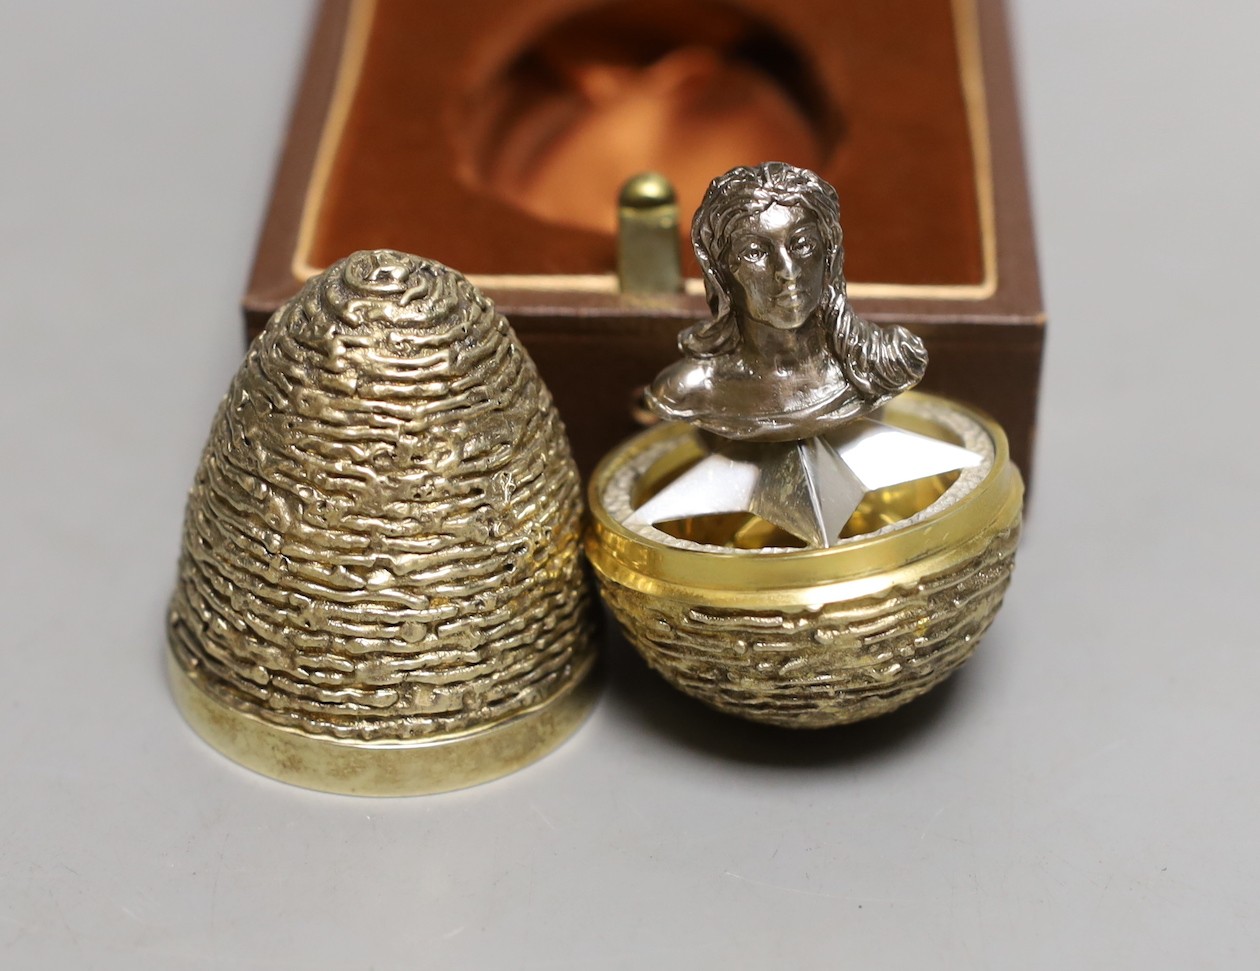 A cased modern silver gilt surprise egg, in the manner of Stuart Devlin, by Richard Lawrence Geere, London, 1976, 67mm, with bust interior.